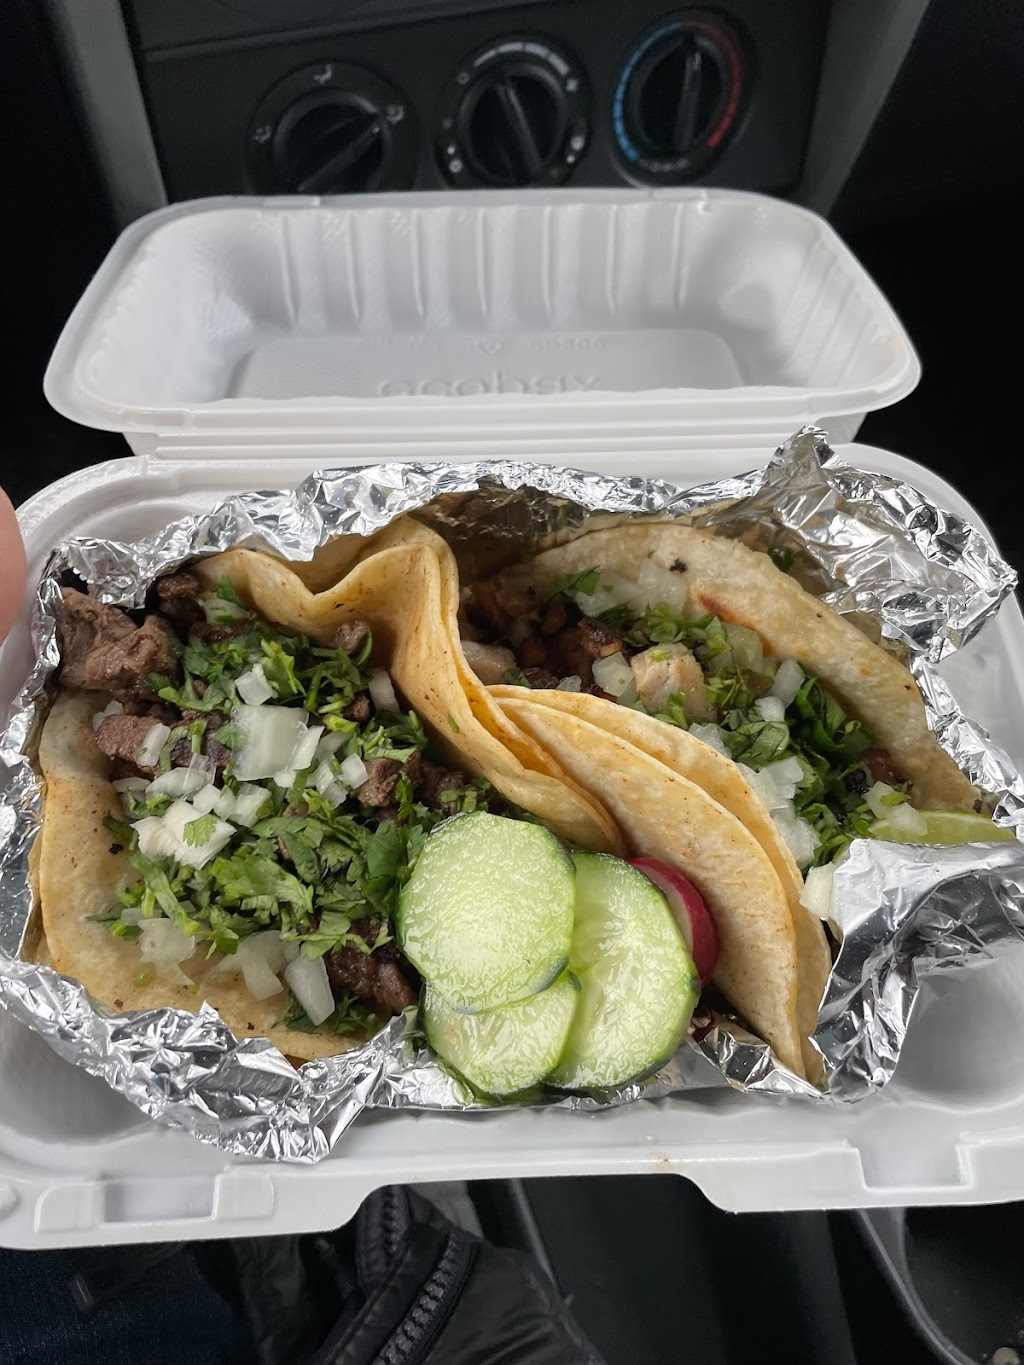 Tacos Nicole | 1308 Dolsontown Rd, Middletown, NY 10940 | Phone: (845) 775-4978